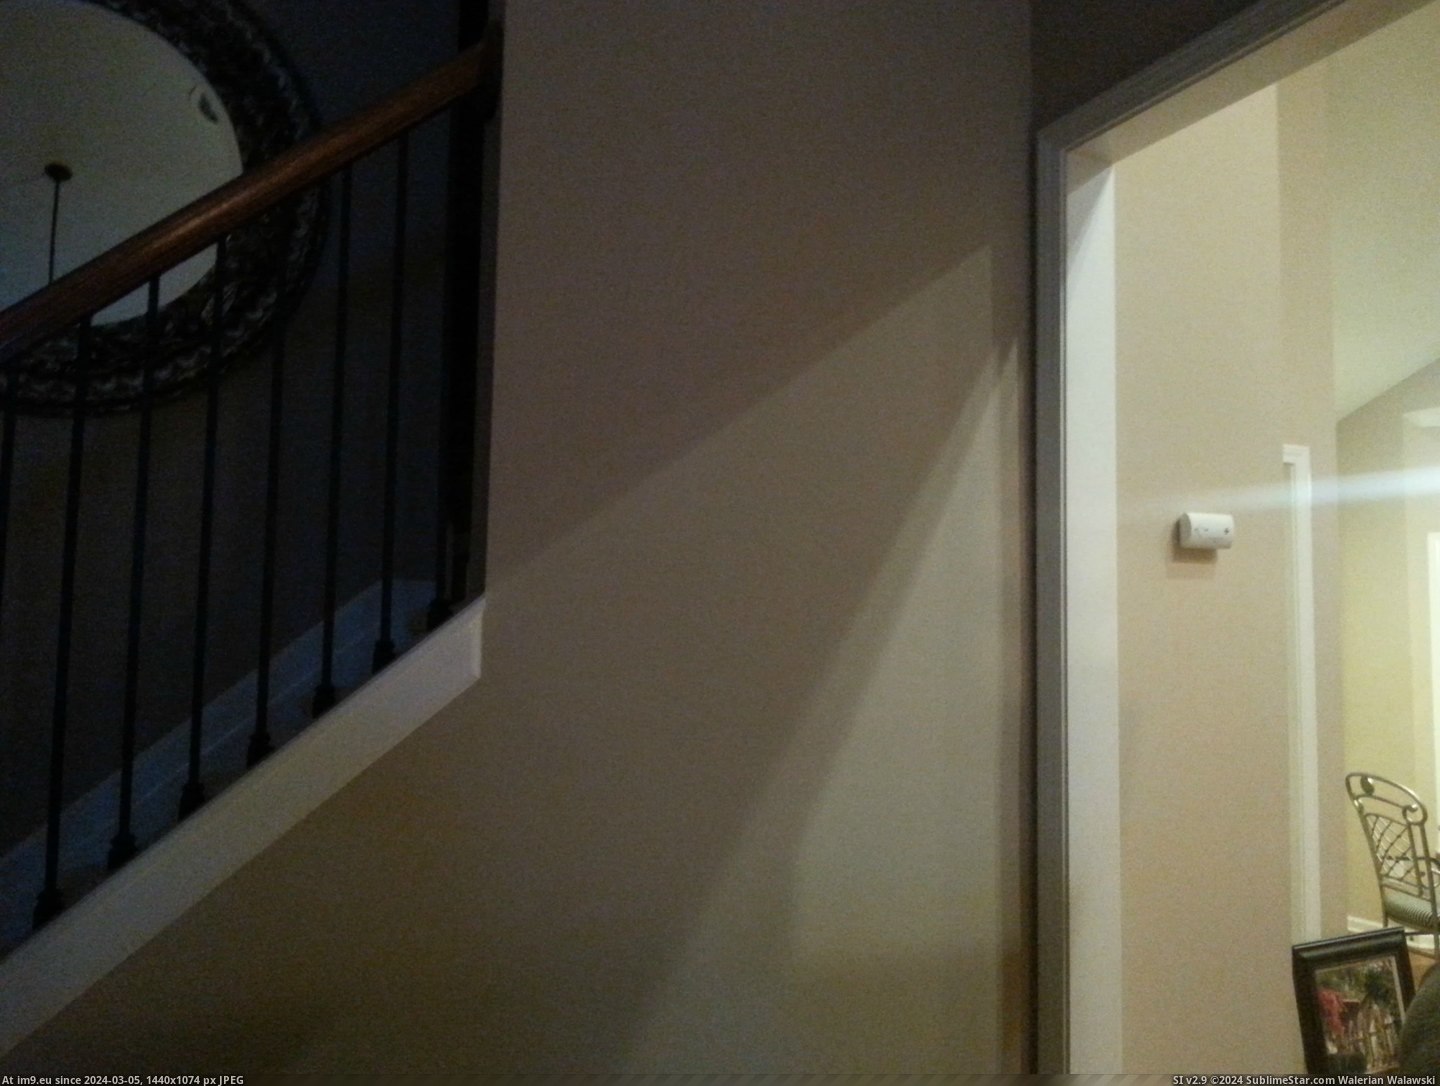 #Lines #Light #Baseboard #Stairs #Doorway [Mildlyinteresting] The light from the doorway lines up with the baseboard of the stairs Pic. (Image of album My r/MILDLYINTERESTING favs))